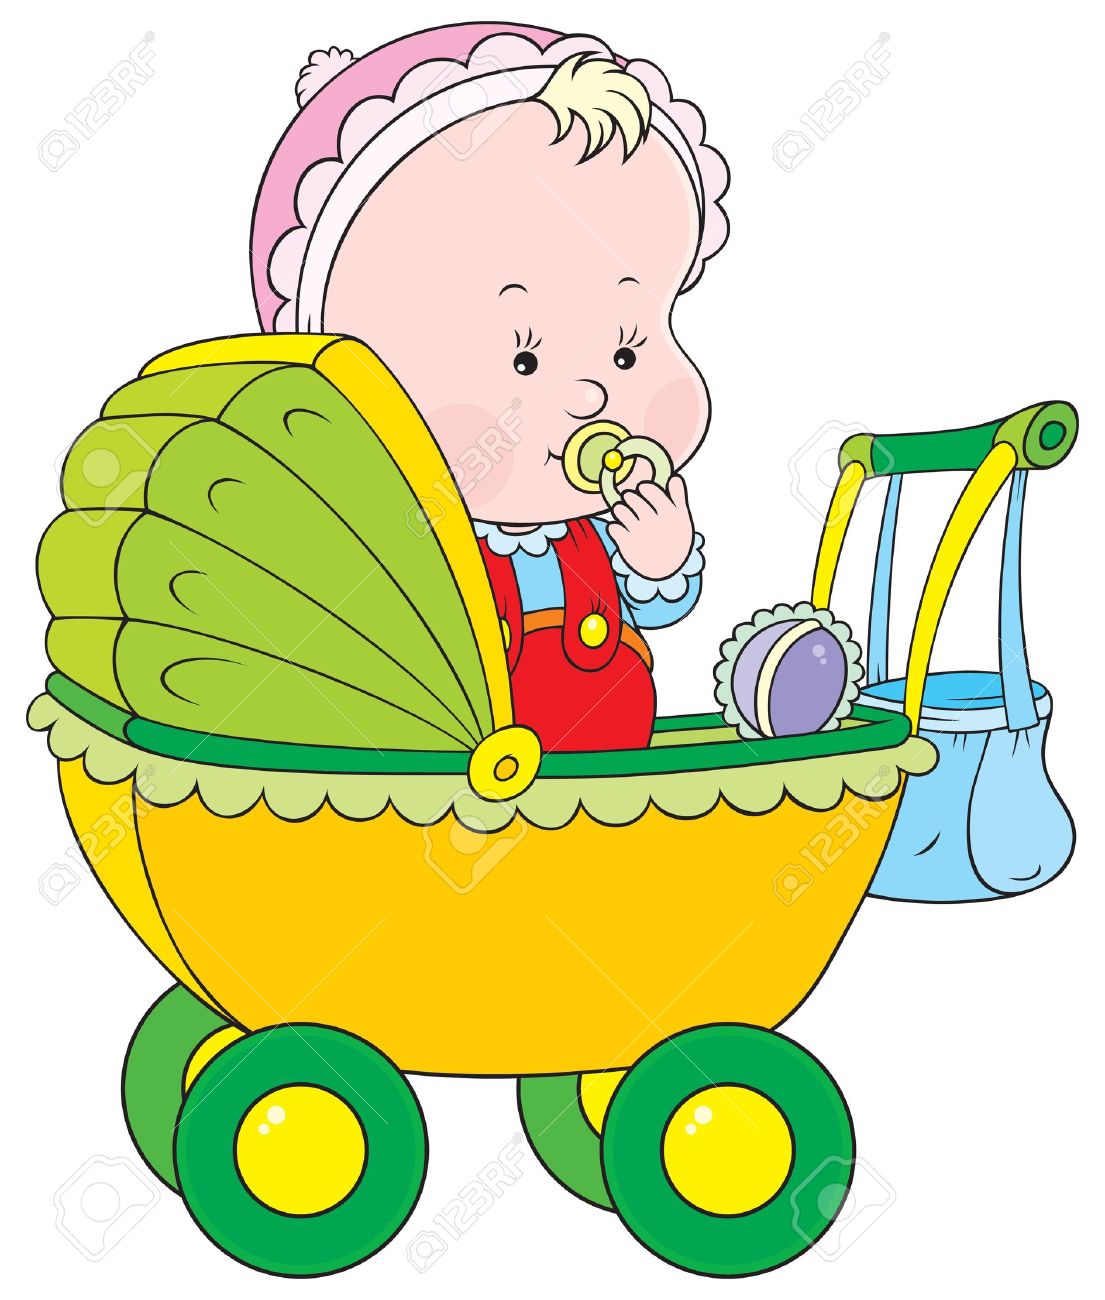 Small Child Sitting In A Pram Royalty Free Cliparts, Vectors, And.